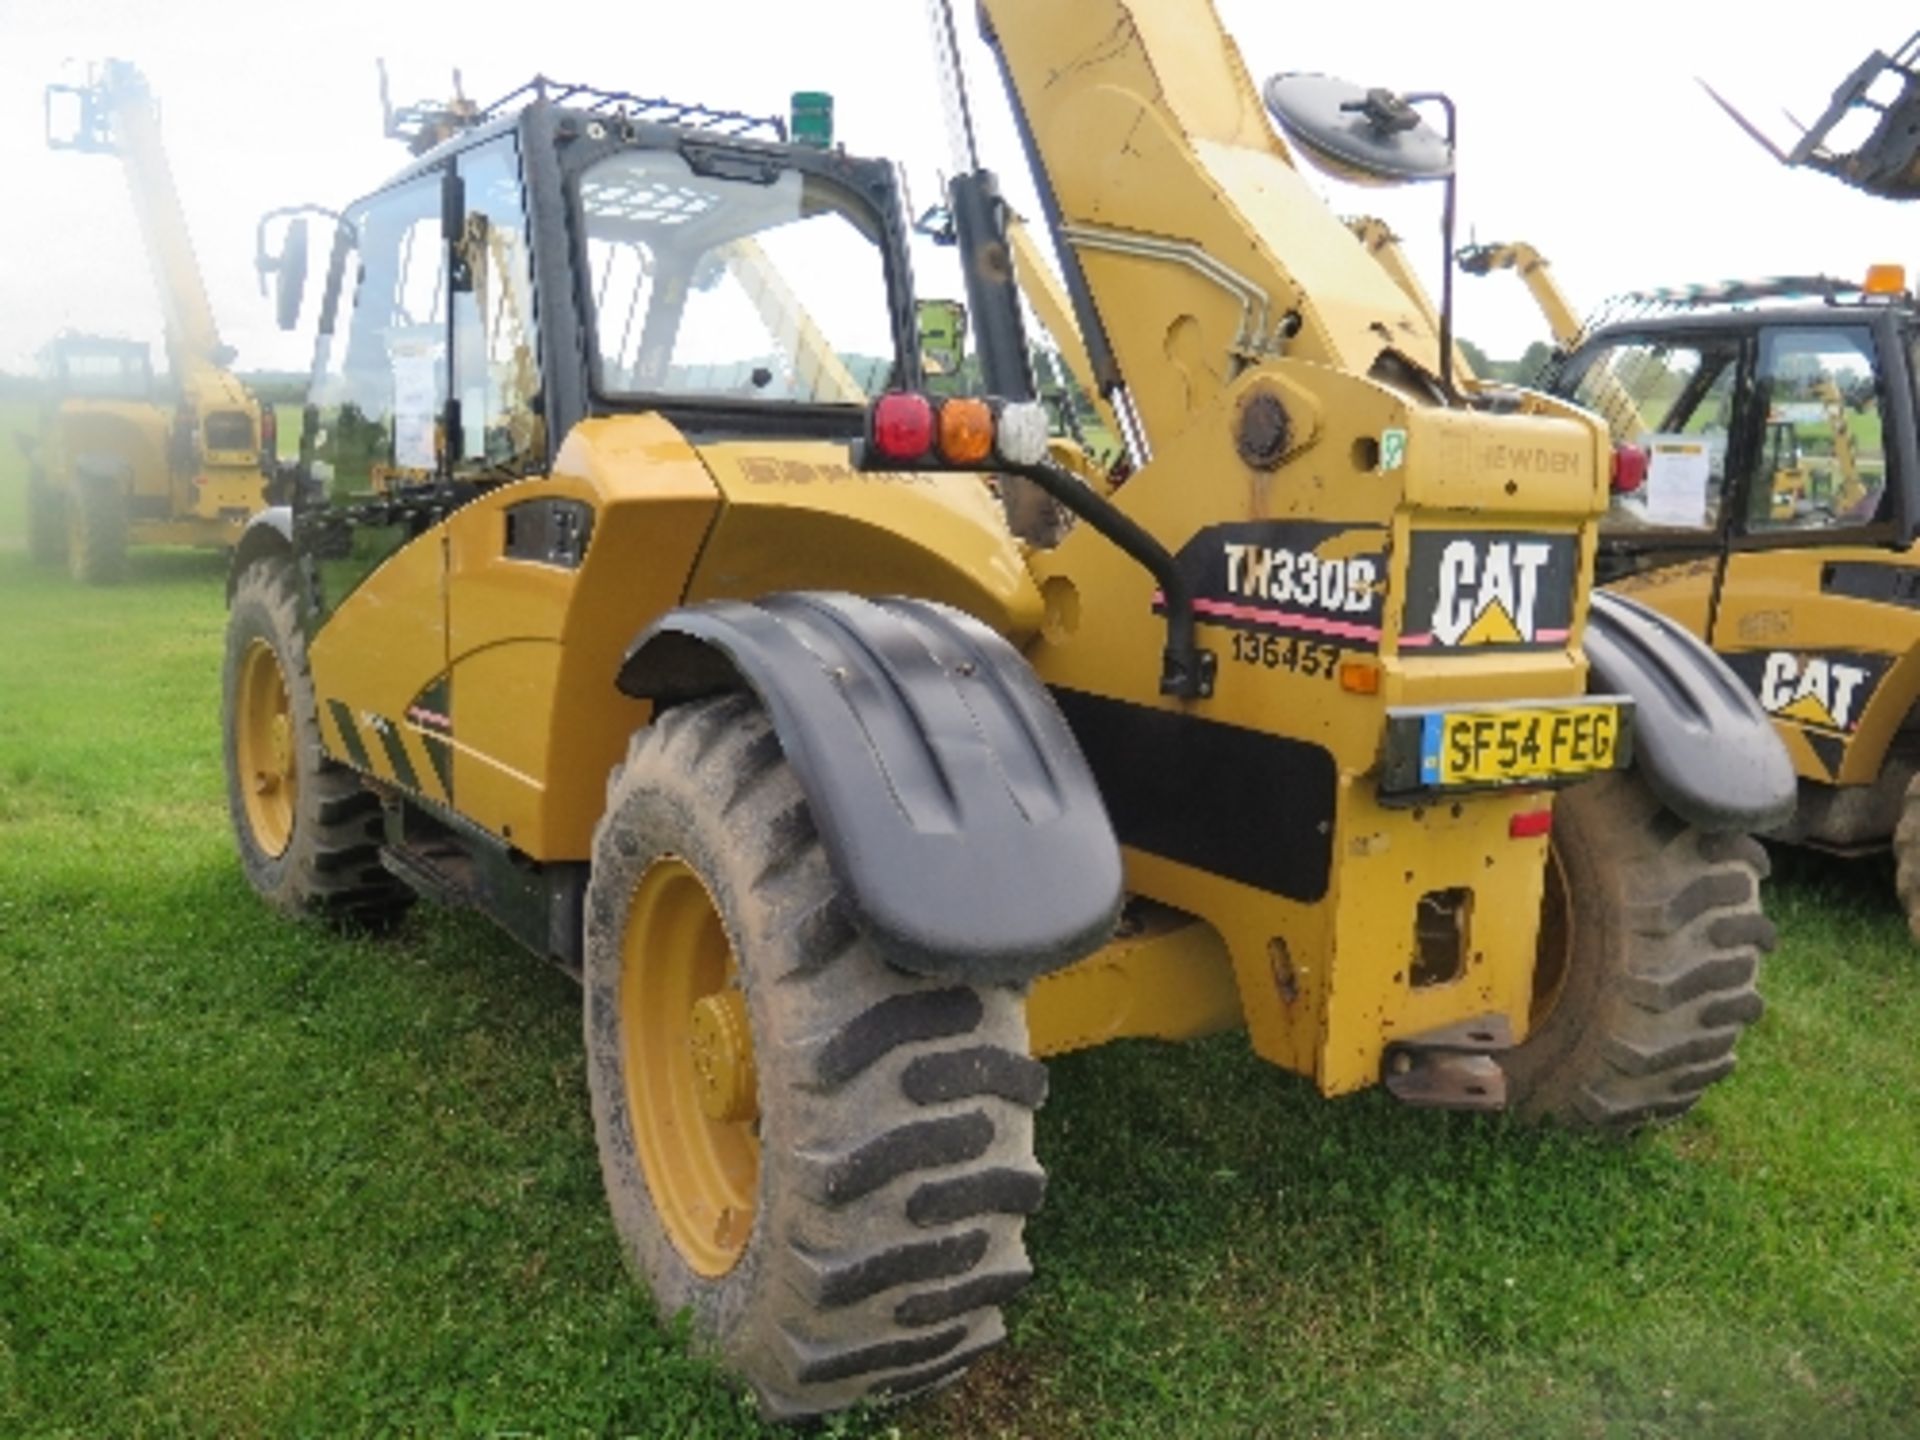 Caterpillar TH330B telehandler 3039 hrs  136457
BELIEVED 2005
ALL LOTS are SOLD AS SEEN WITHOUT - Image 5 of 7